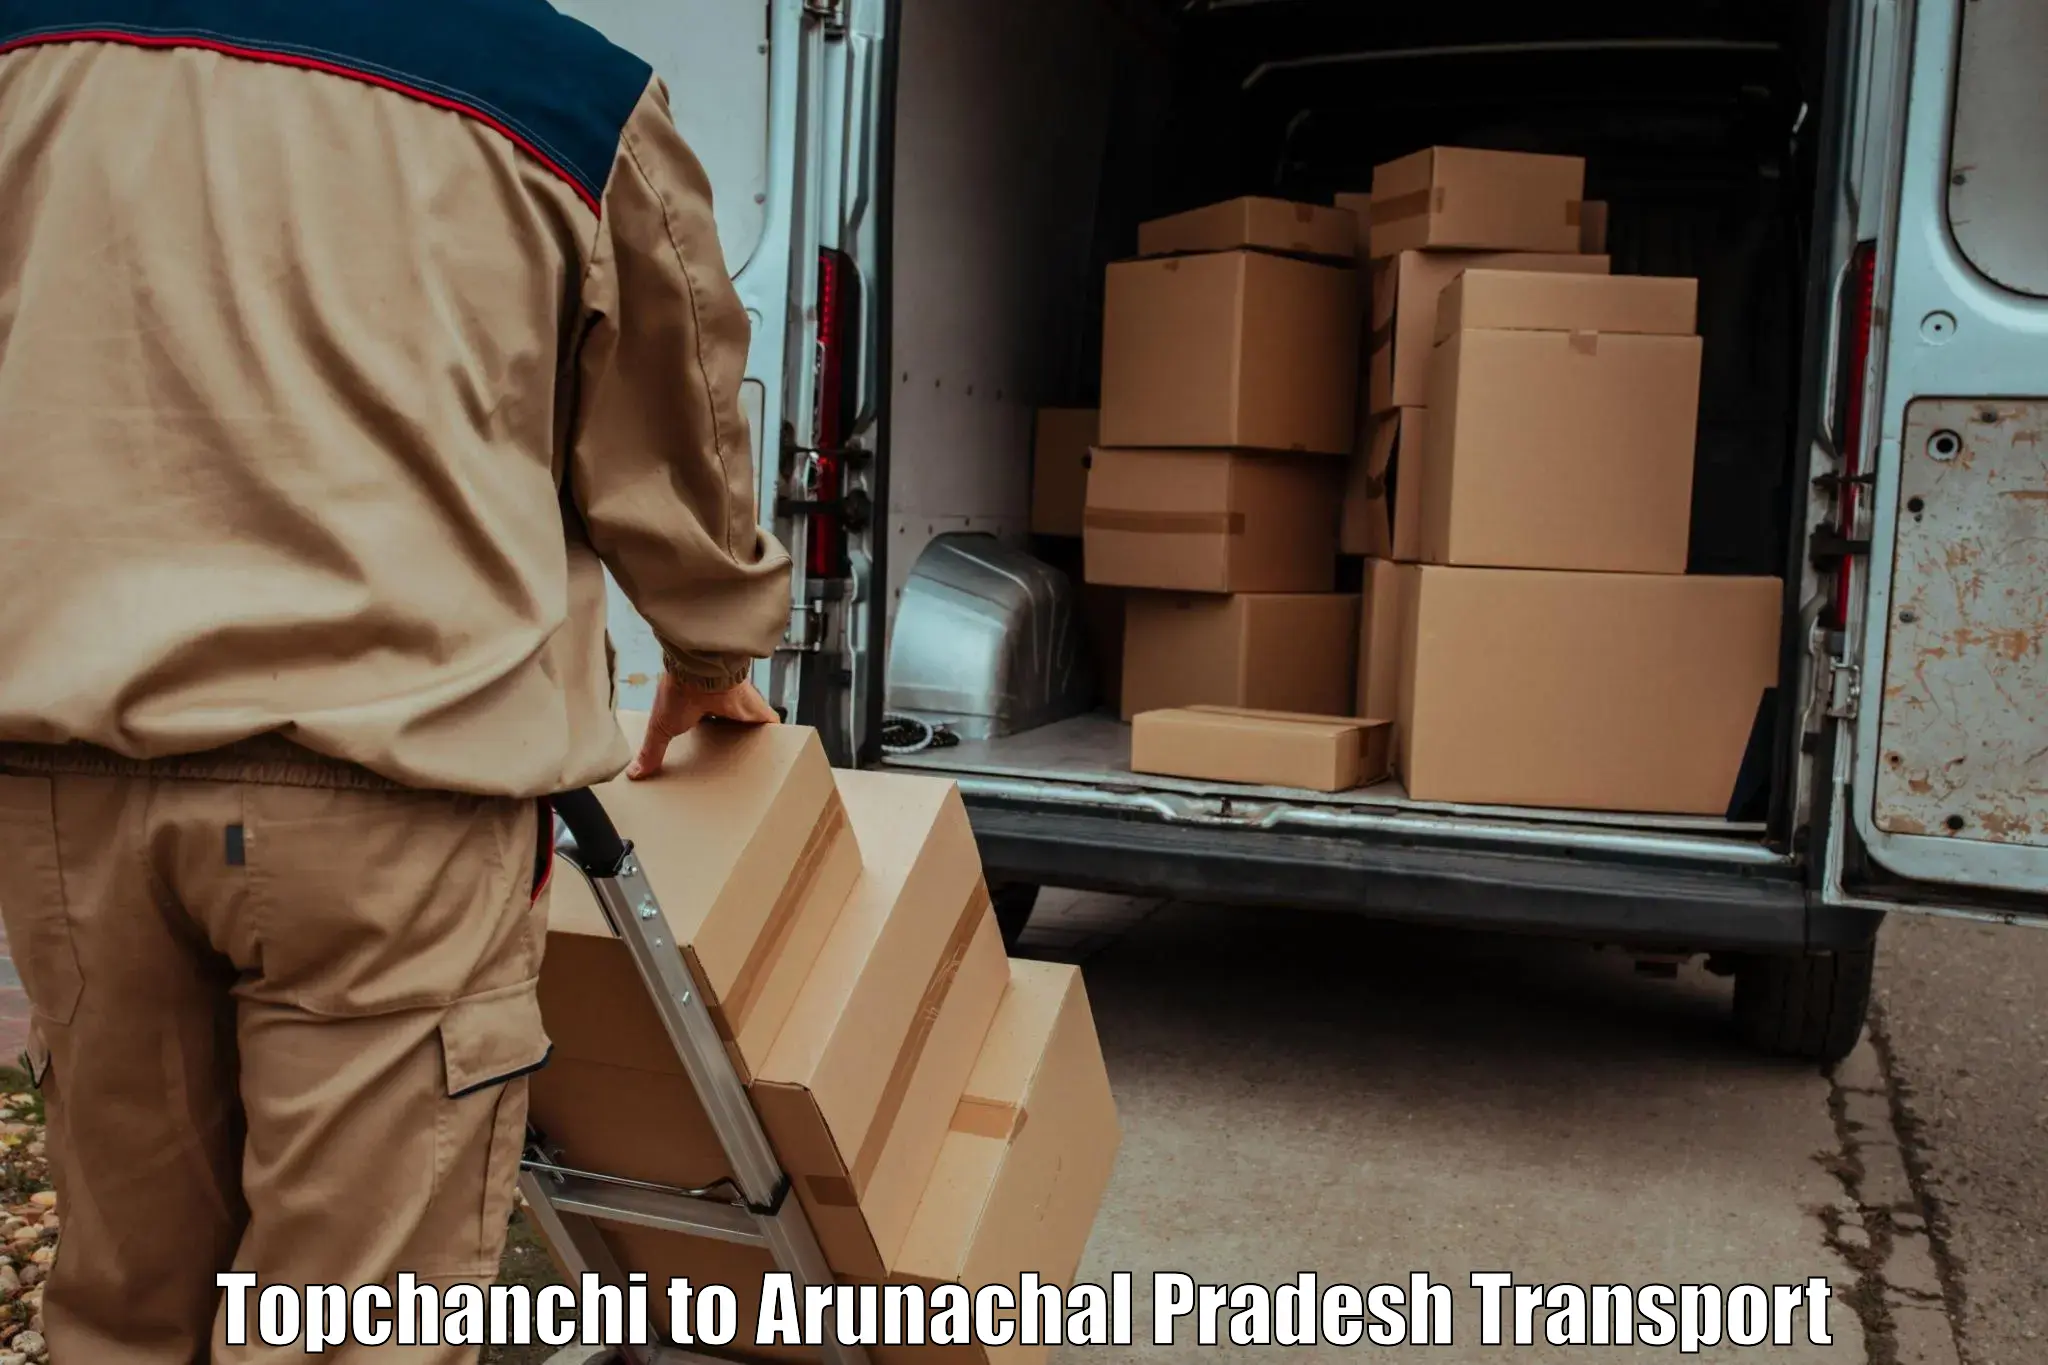 Container transportation services Topchanchi to Deomali